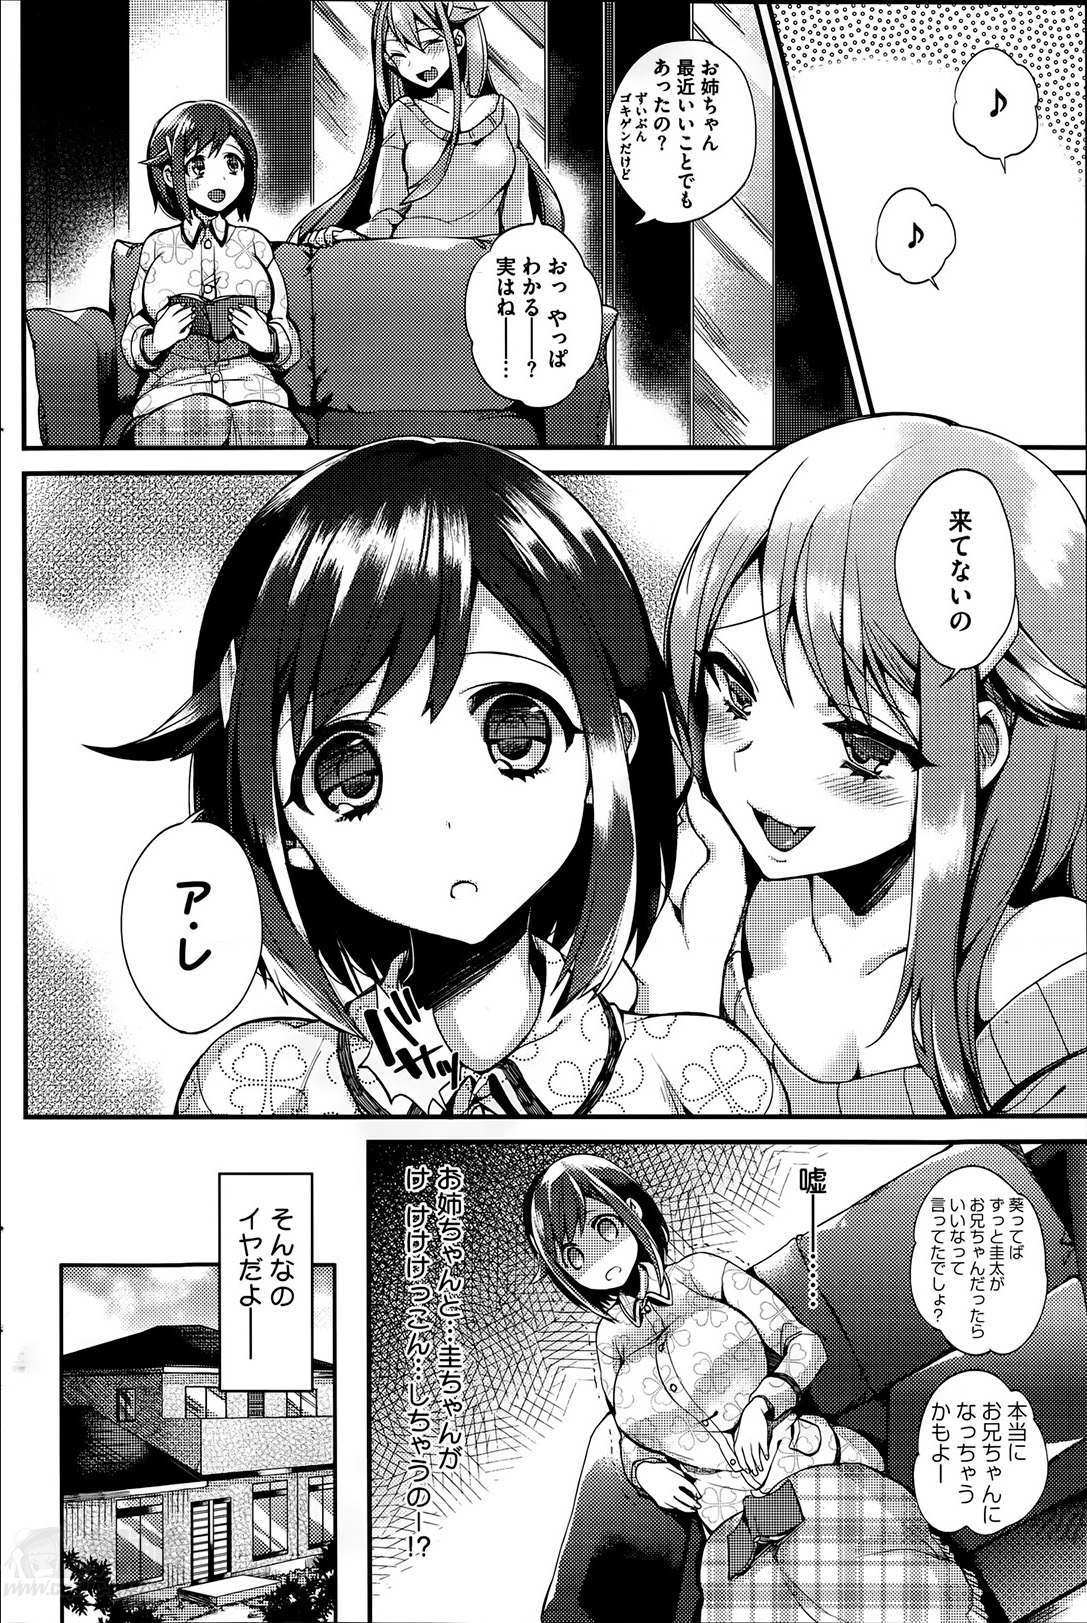 [Shindou] Sisters Conflict Ch.1-2 page 10 full